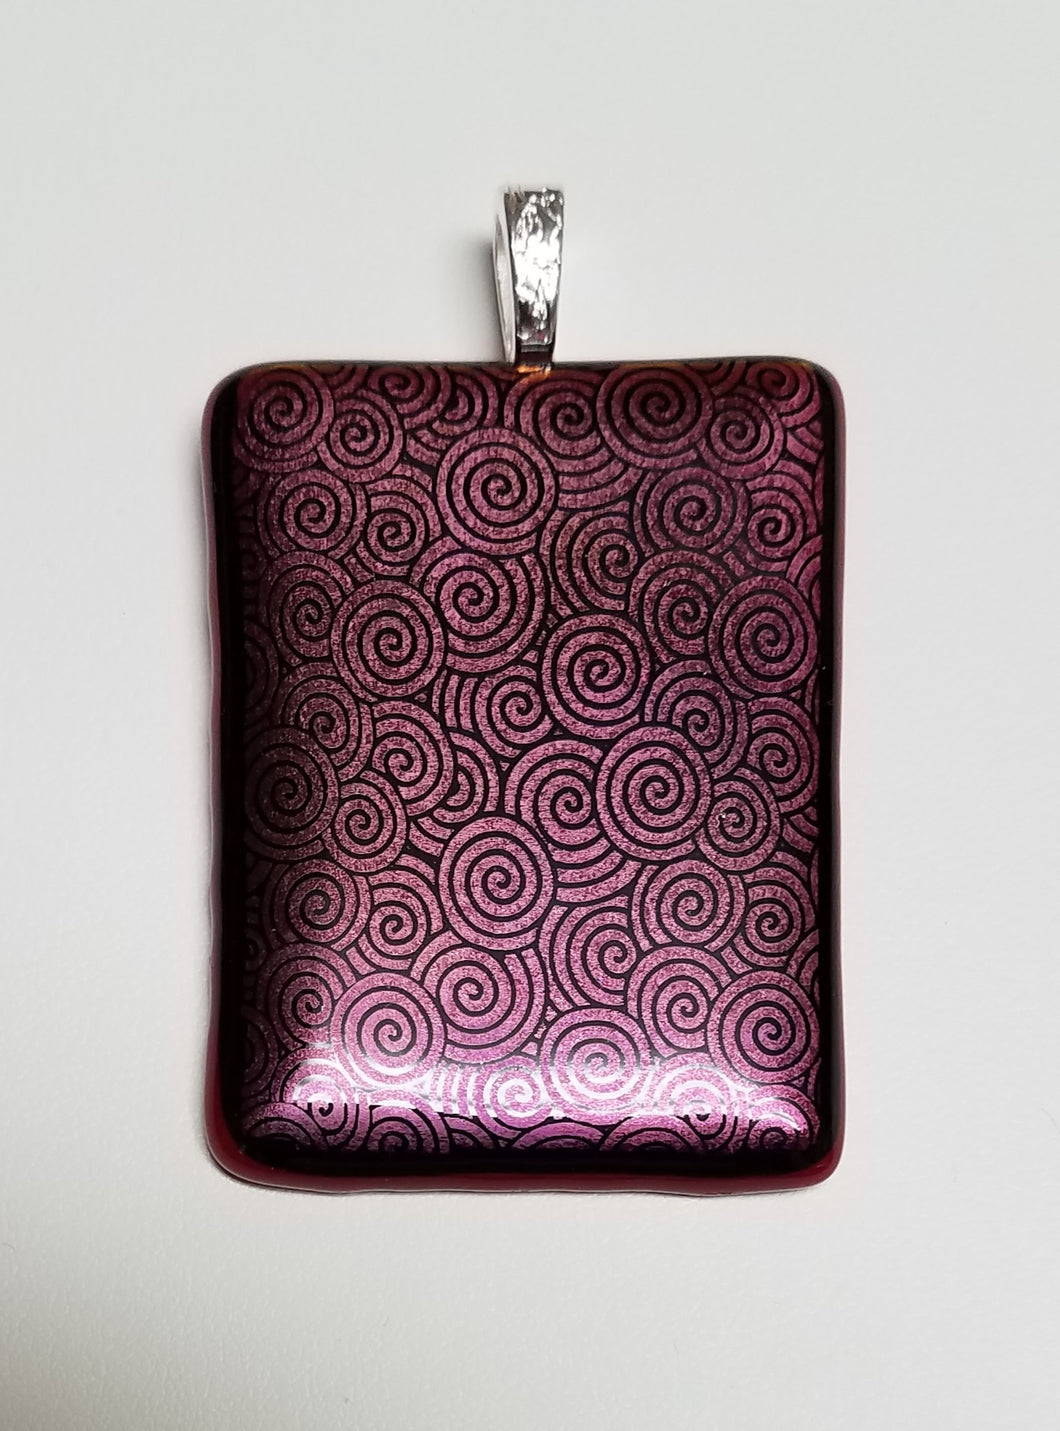 Black swirls are etched onto red dichroic glass